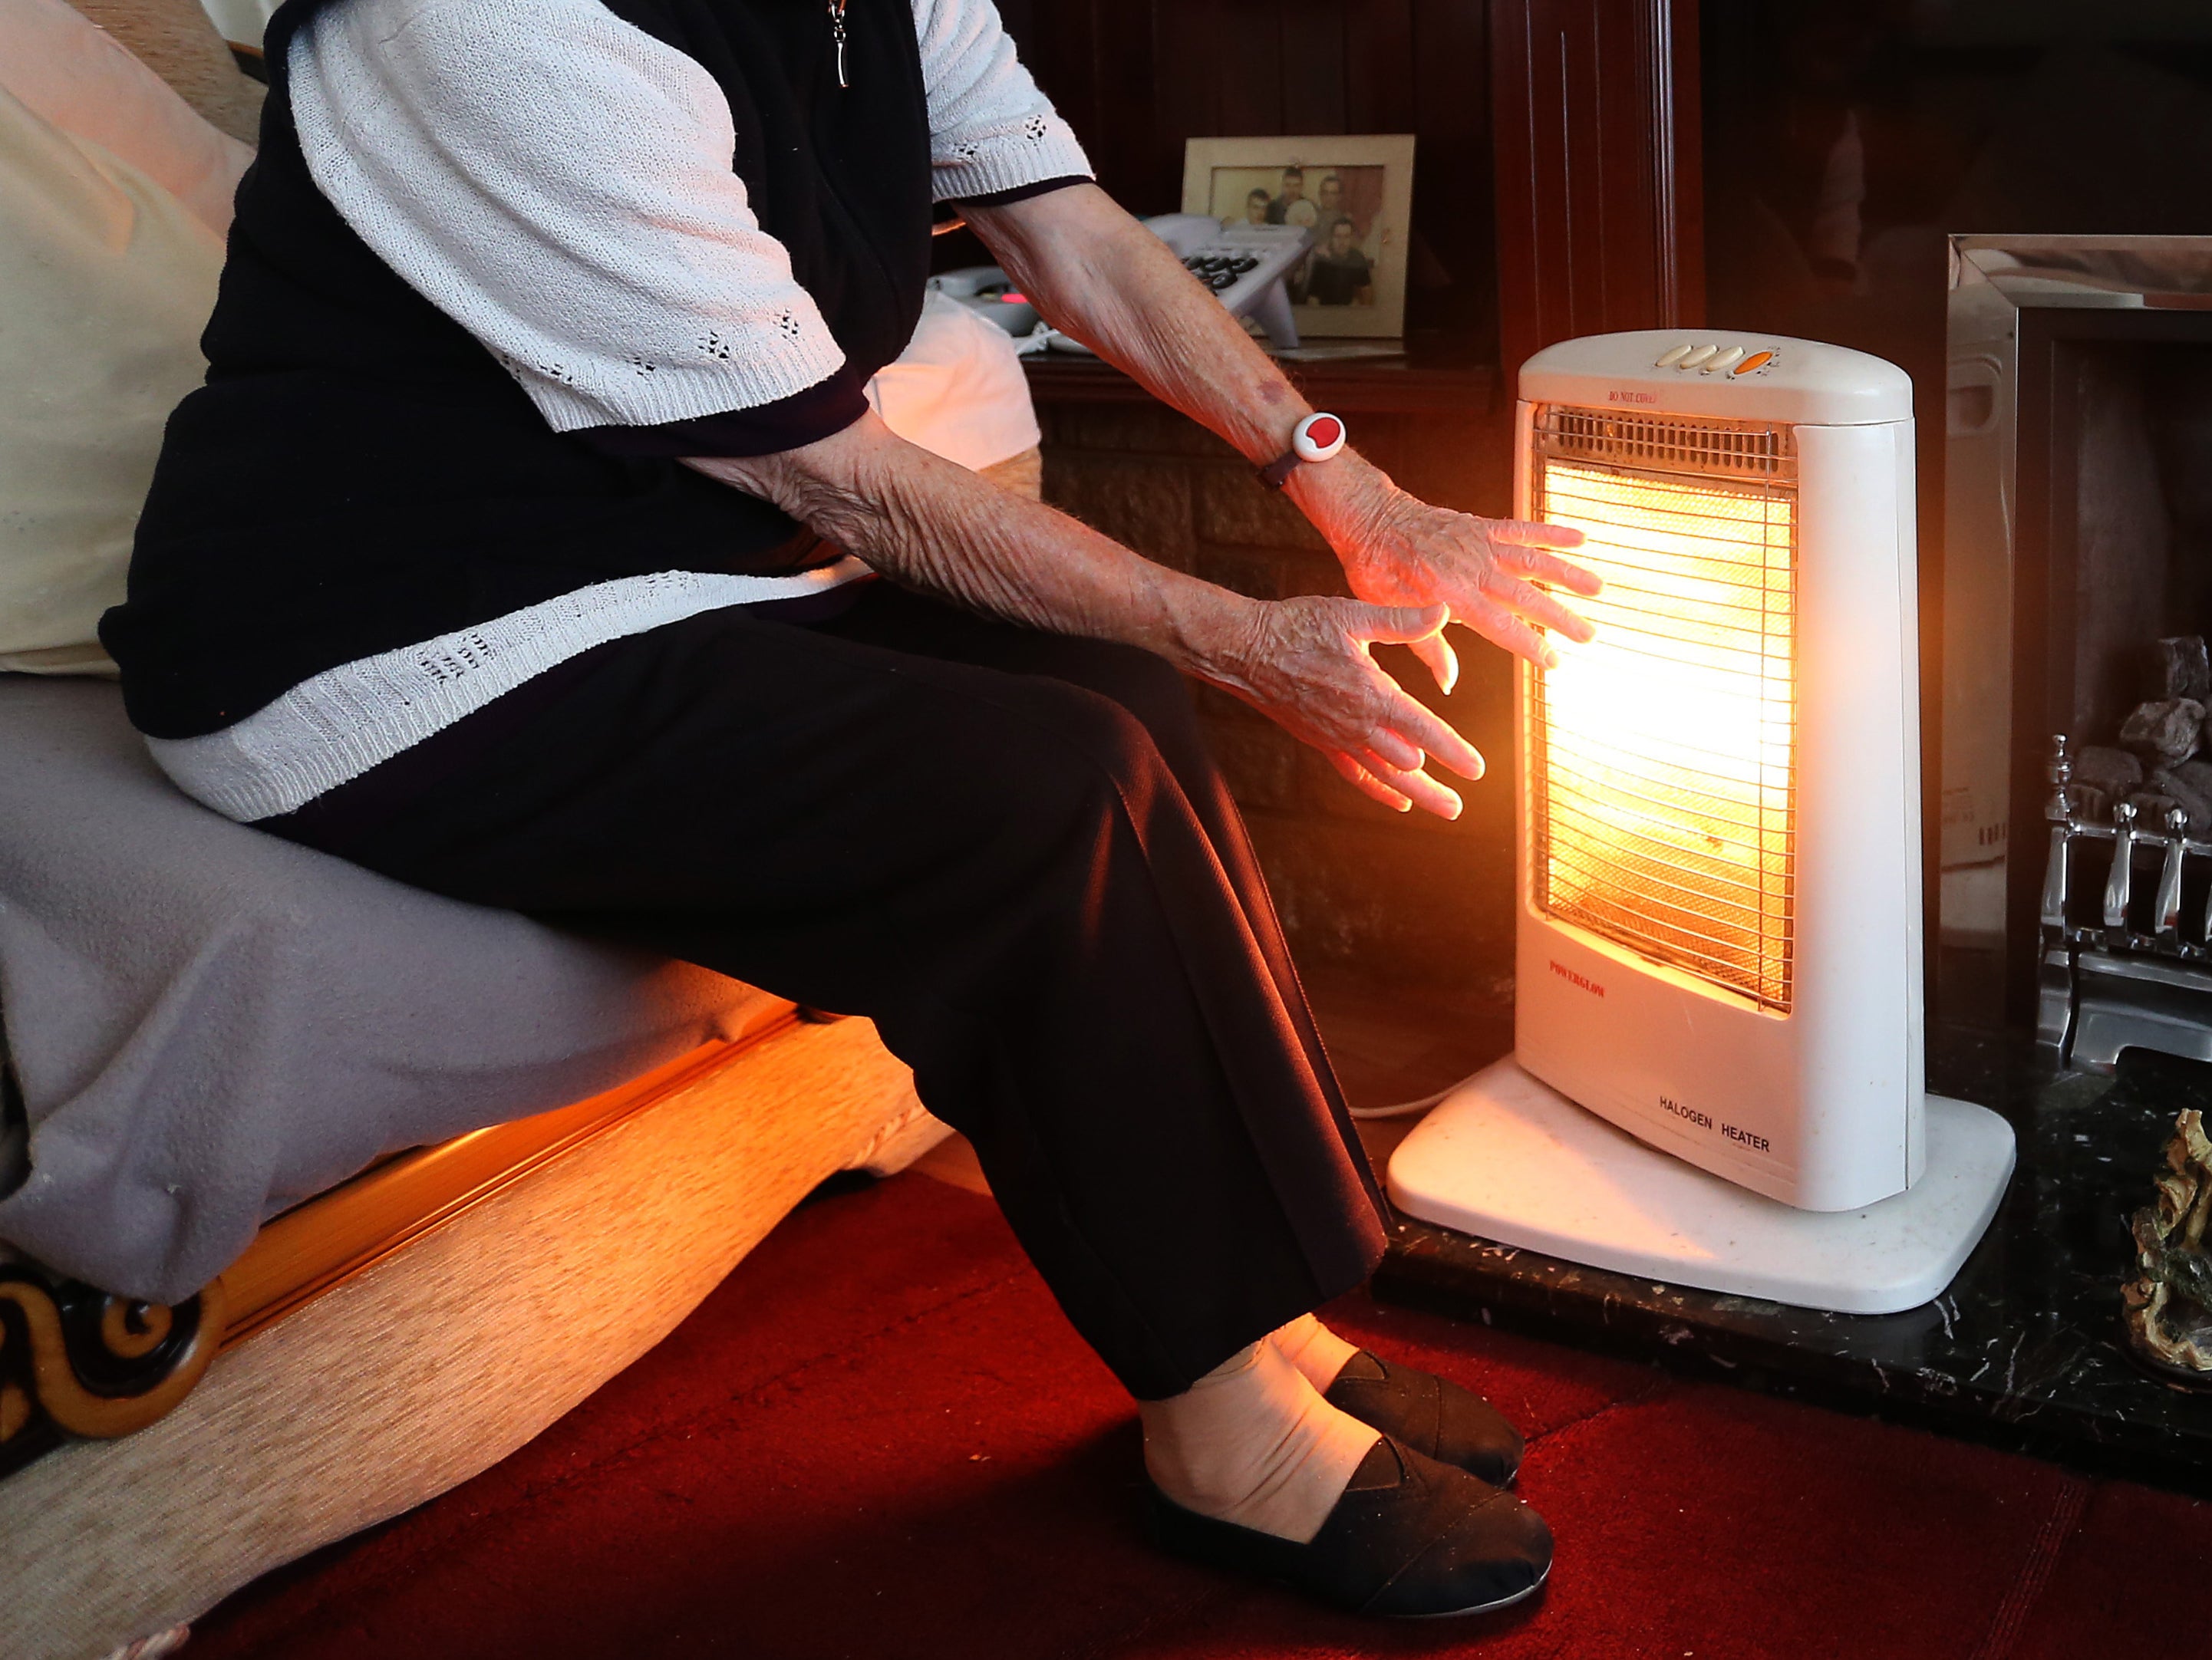 Fears are mounting over a surge in fuel poverty and illness this winter